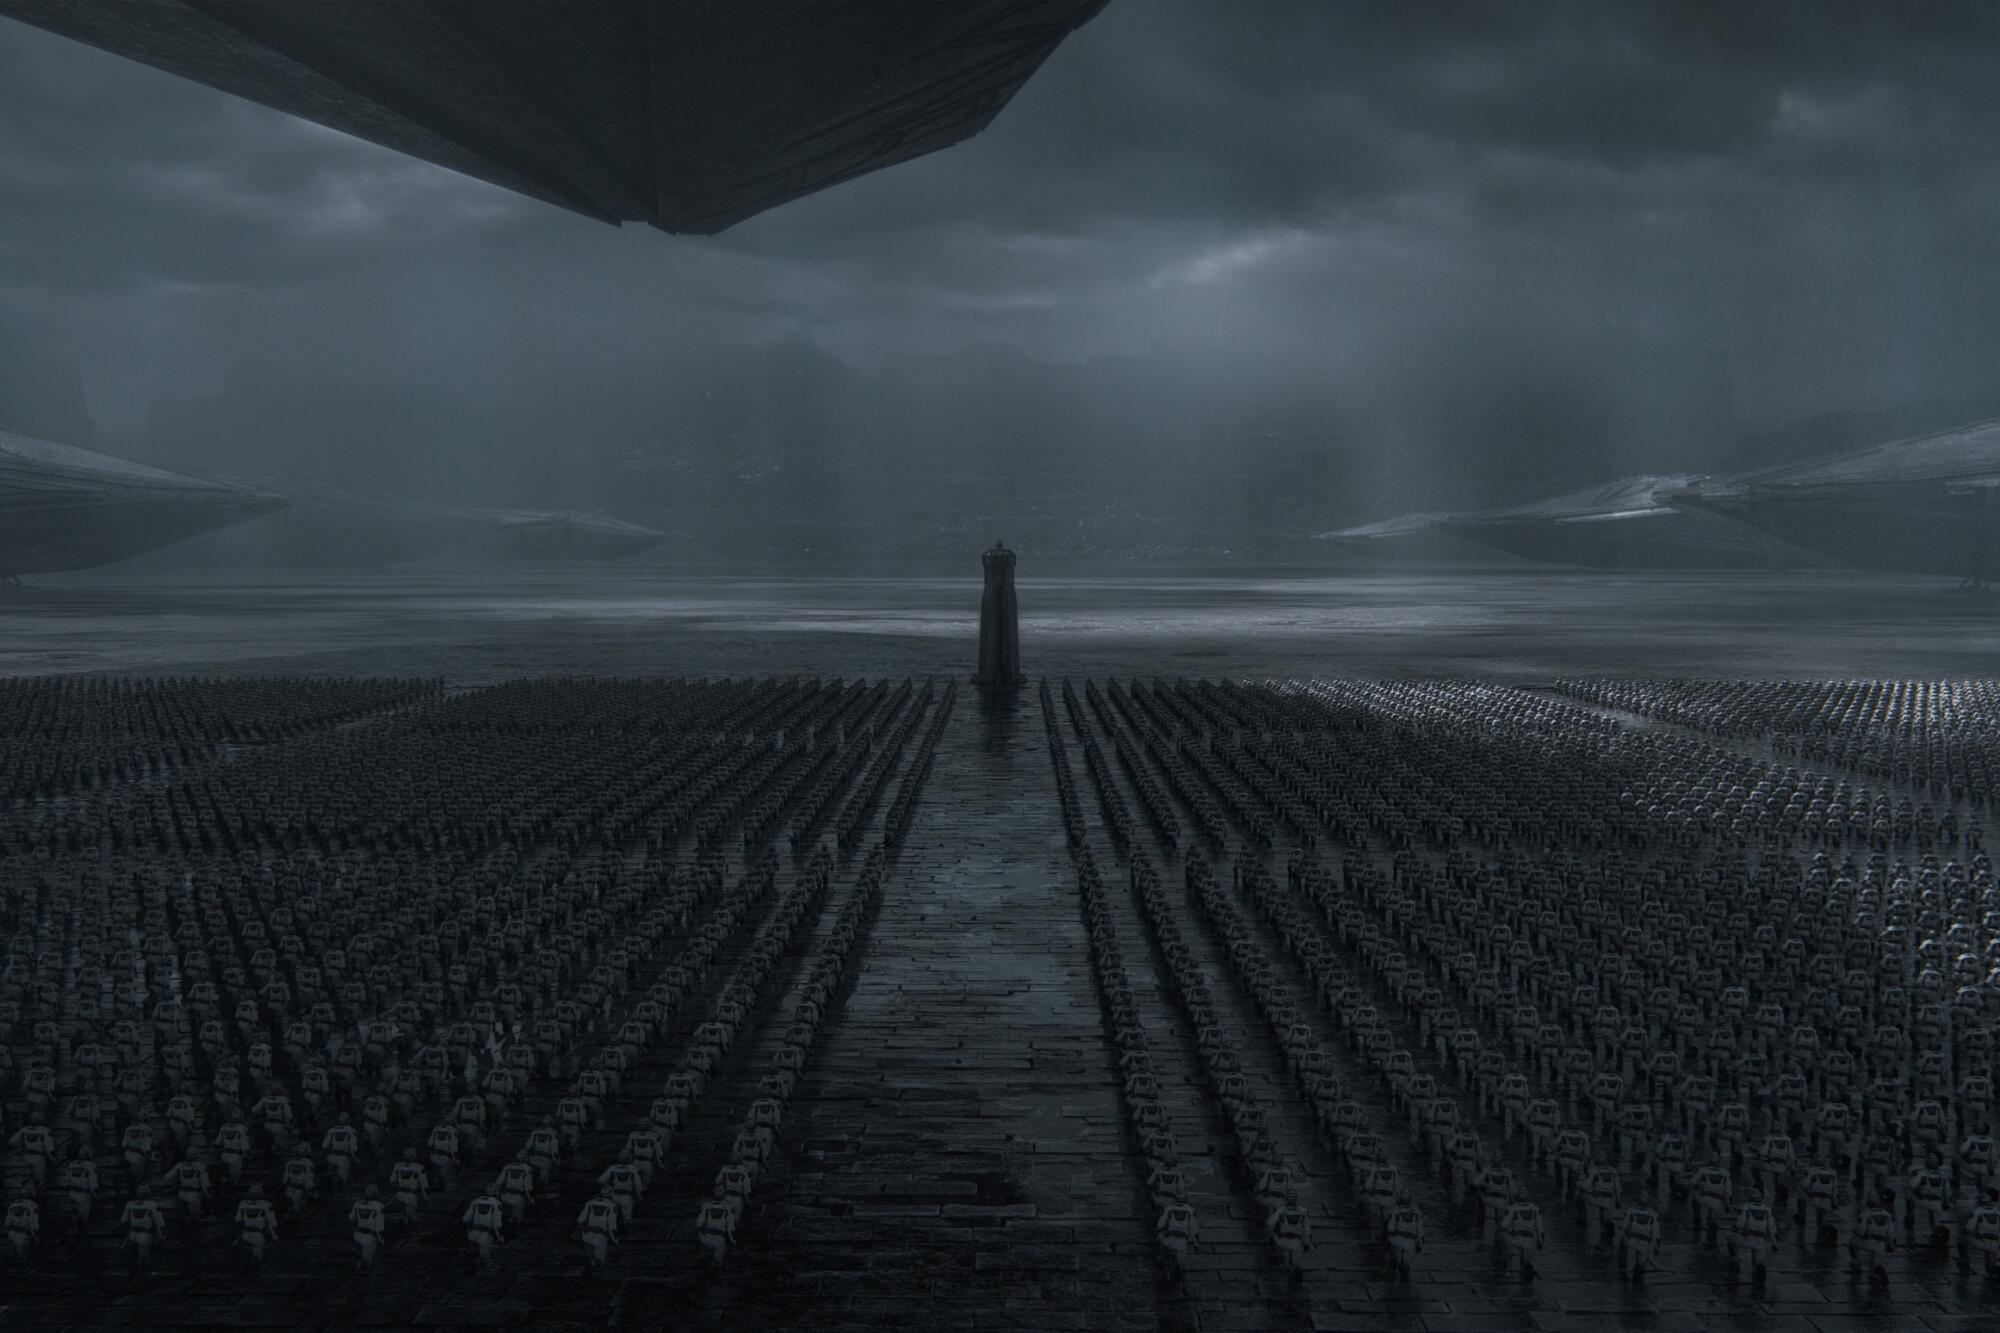 A massive army lines up in columns under gloomy skies in a scene from Dune